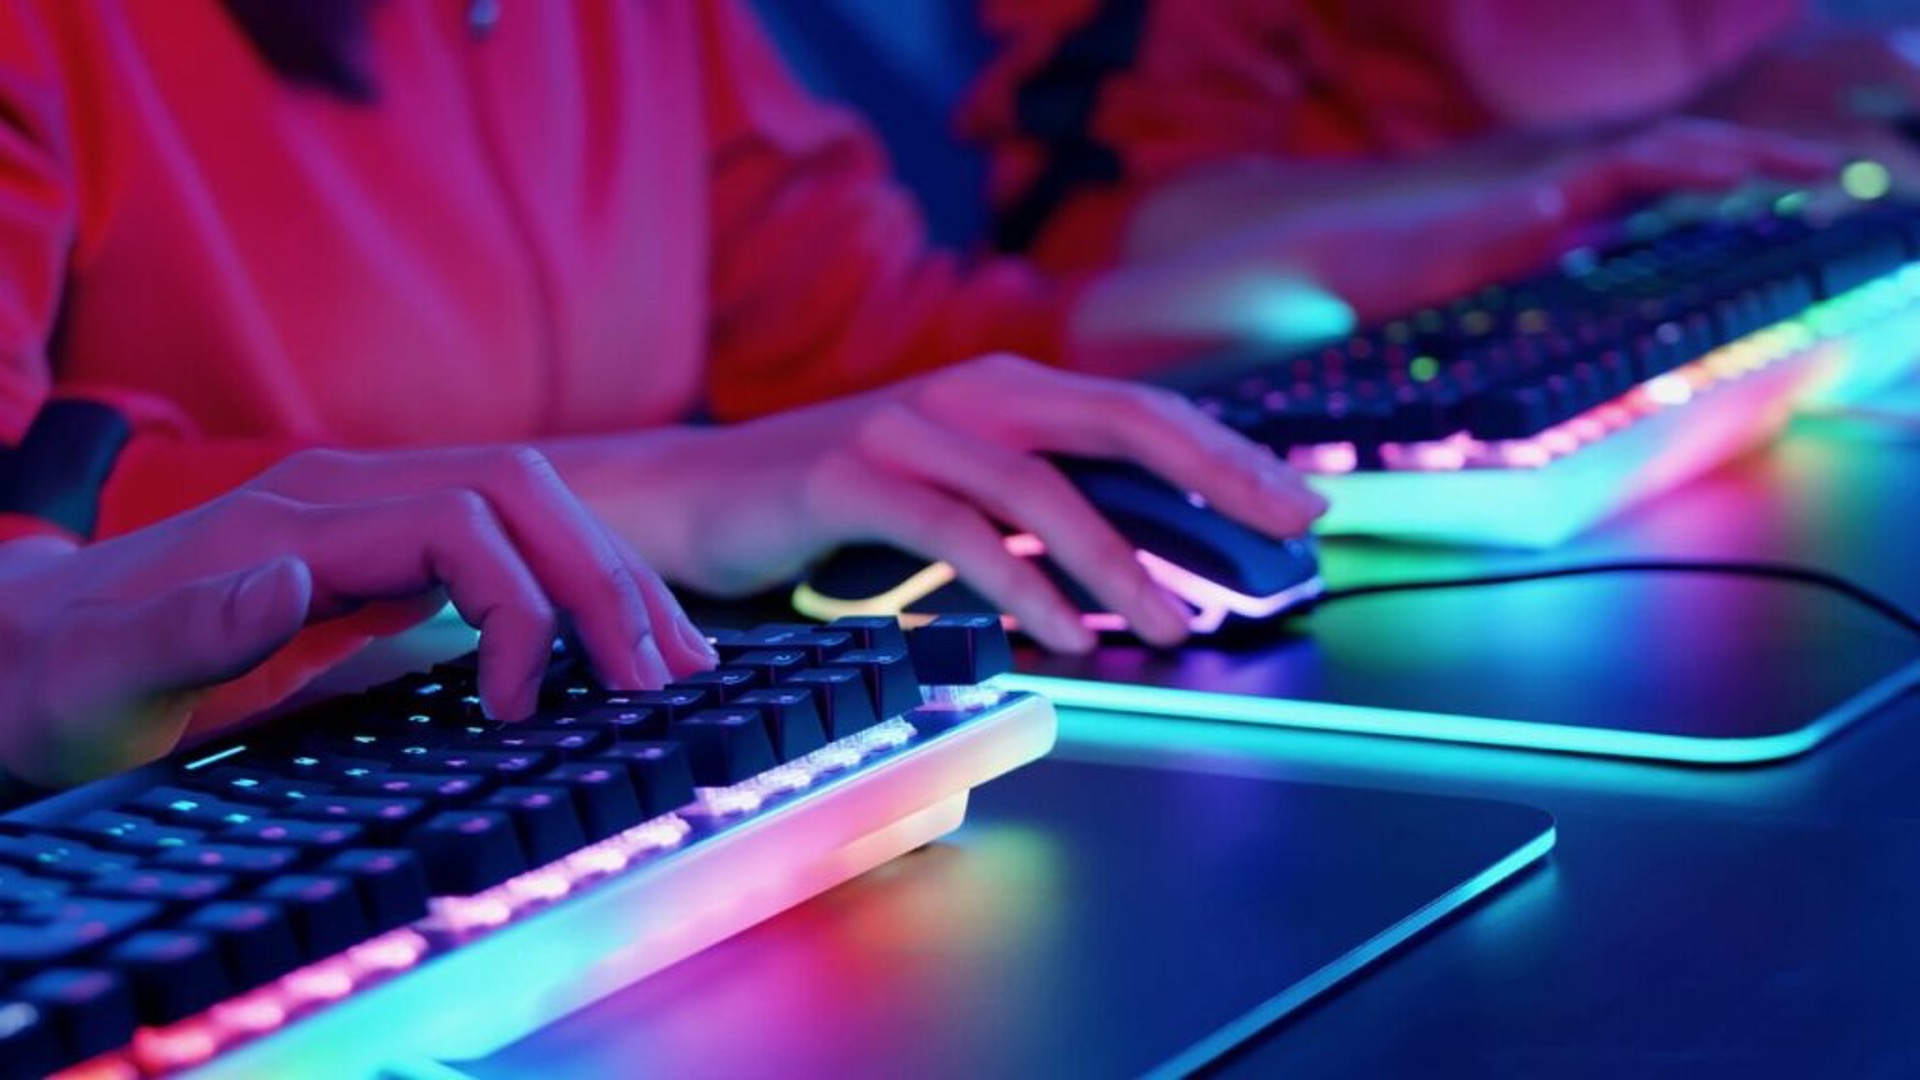 Why Gaming Keyboards Have Lights